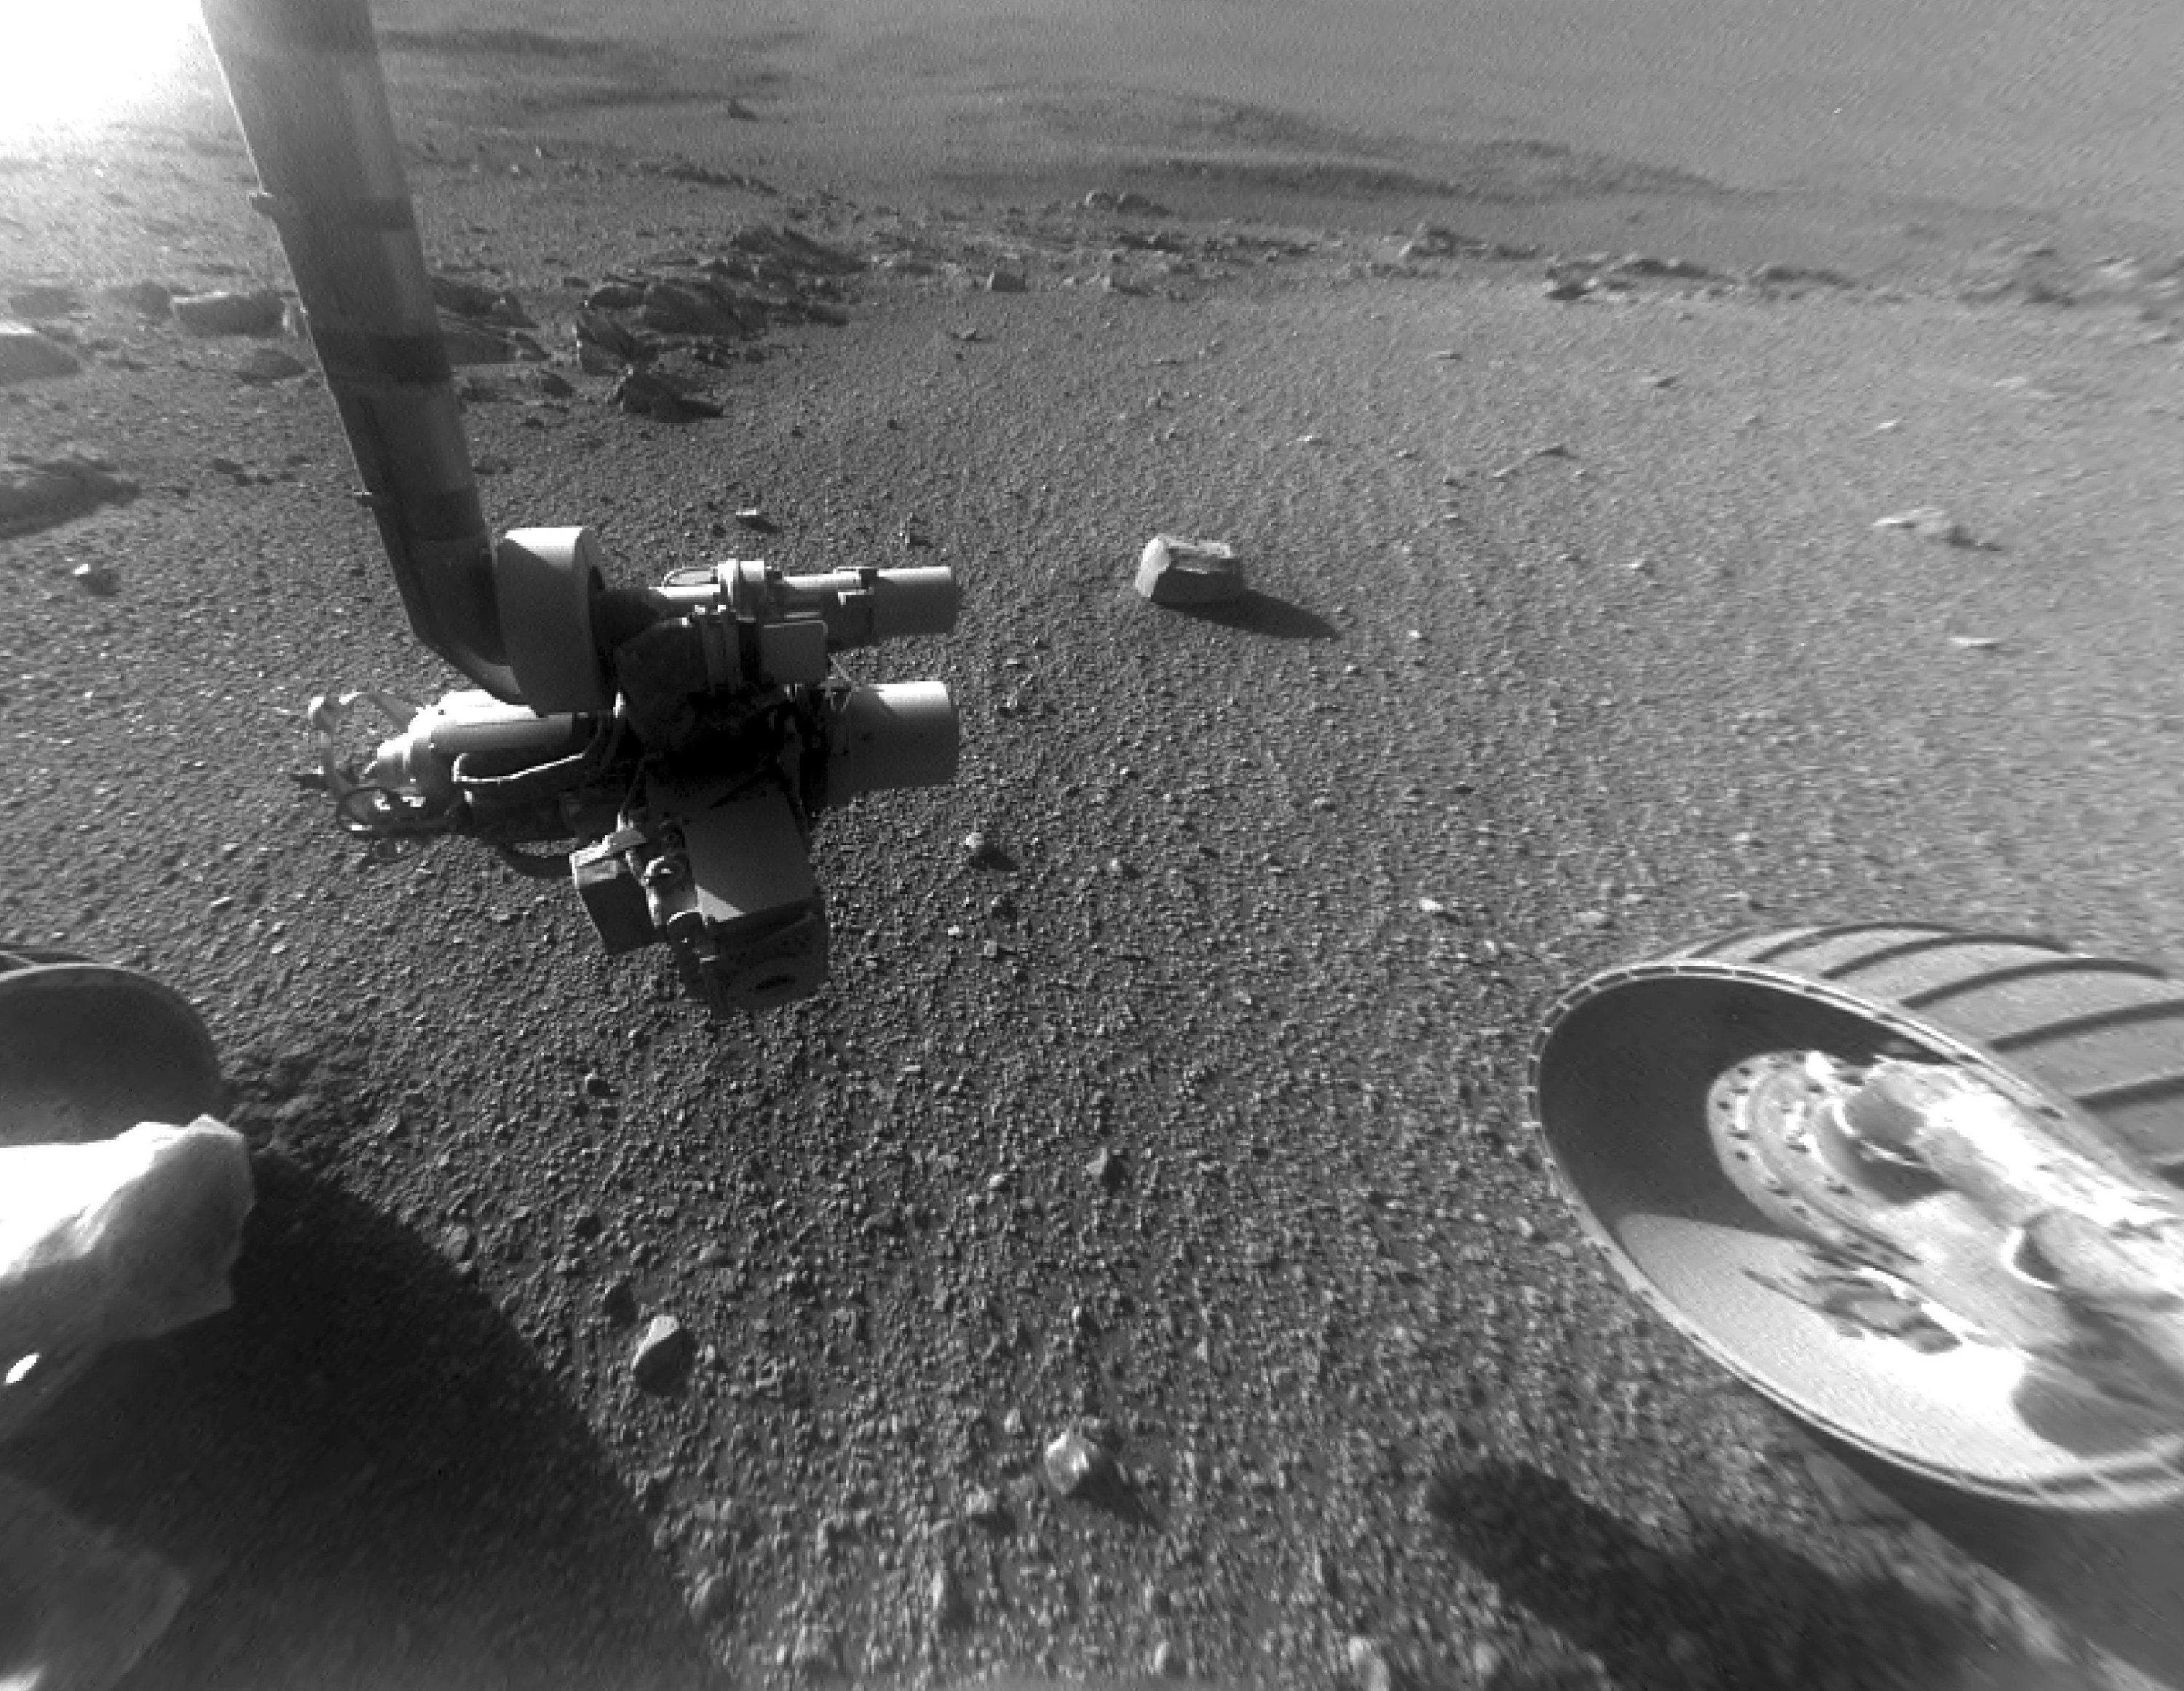 This Jan. 4, 2018 photo made available by NASA shows a view from the front Hazard Avoidance Camera of the Opportunity rover on the inboard slope of the western rim of Endeavour Crater on the planet Mars. (NASA/JPL-Caltech via AP)